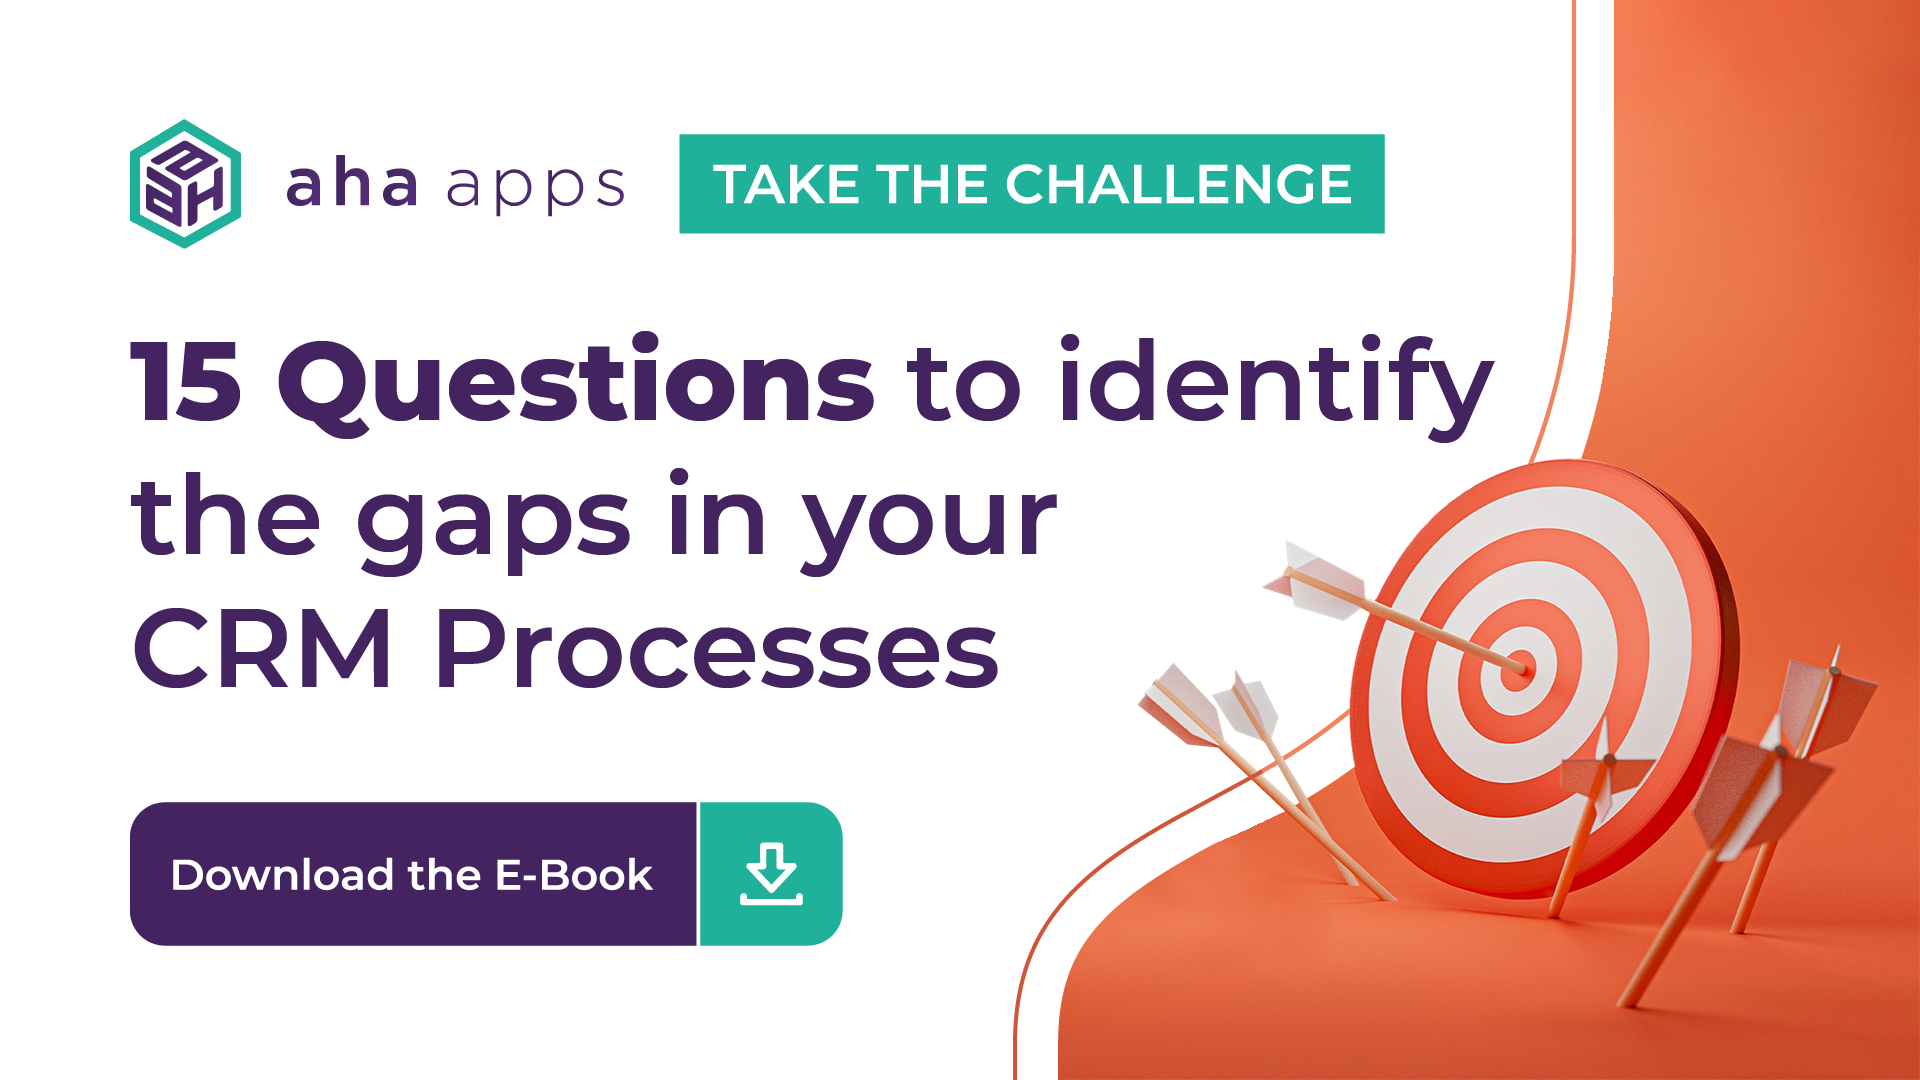 Take The CRM Challenge - AhaApps